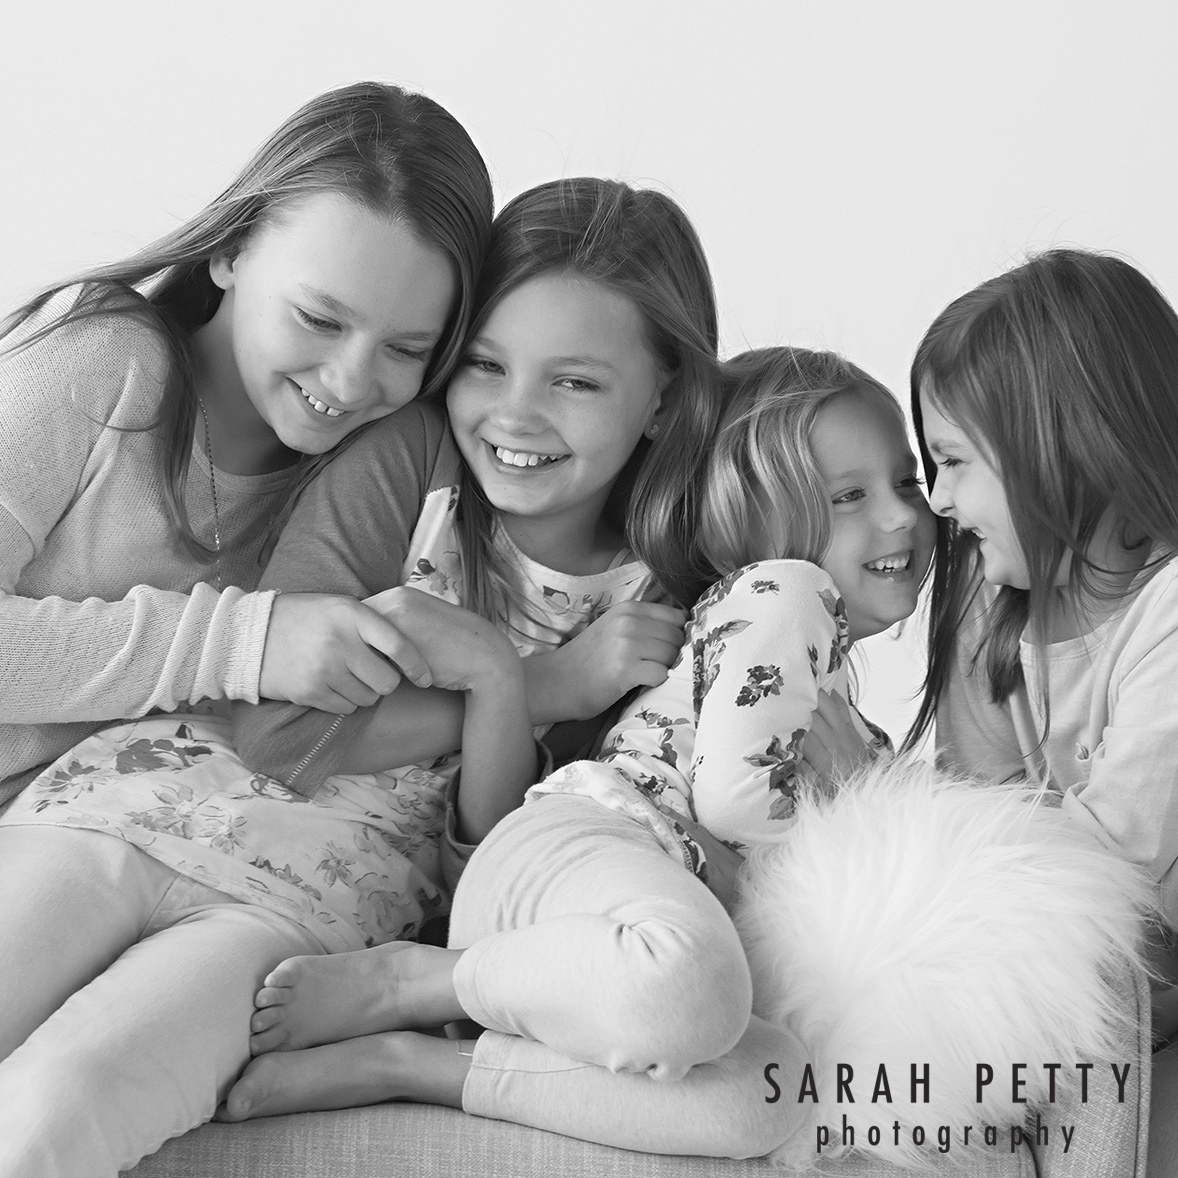 My 9 Favorite Images from 2017 at Sarah Petty Photography